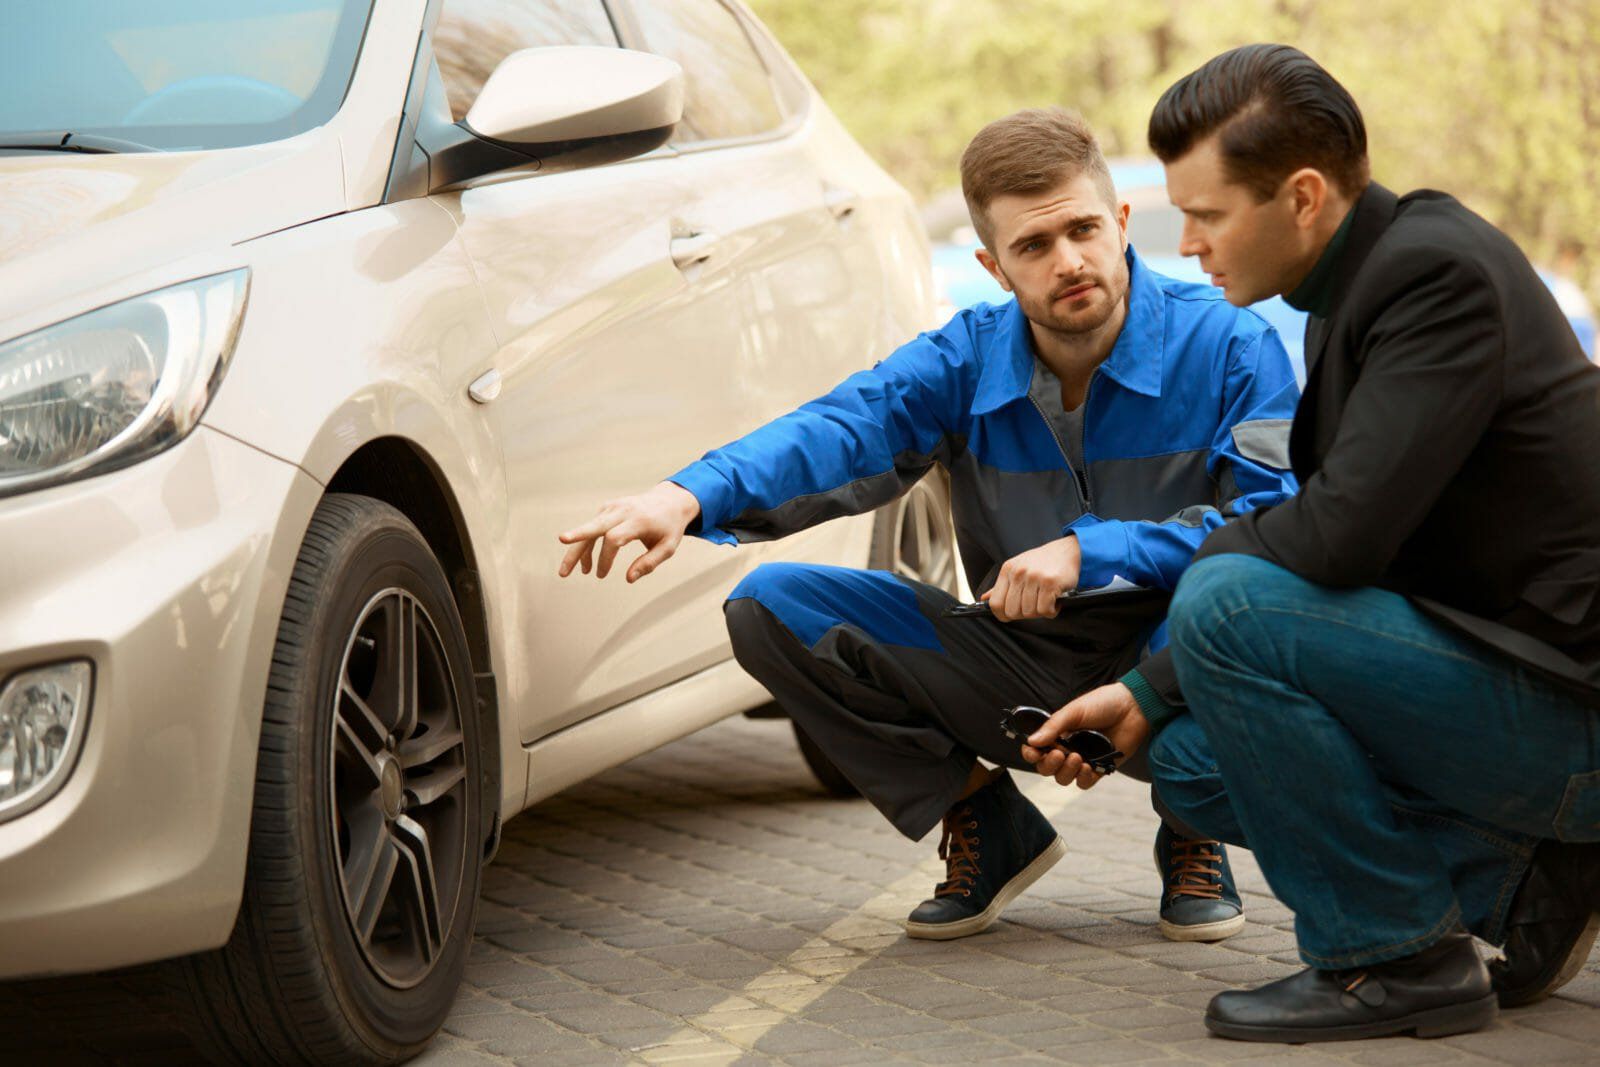 Mechanic and Customer Discussing Problem With Car.